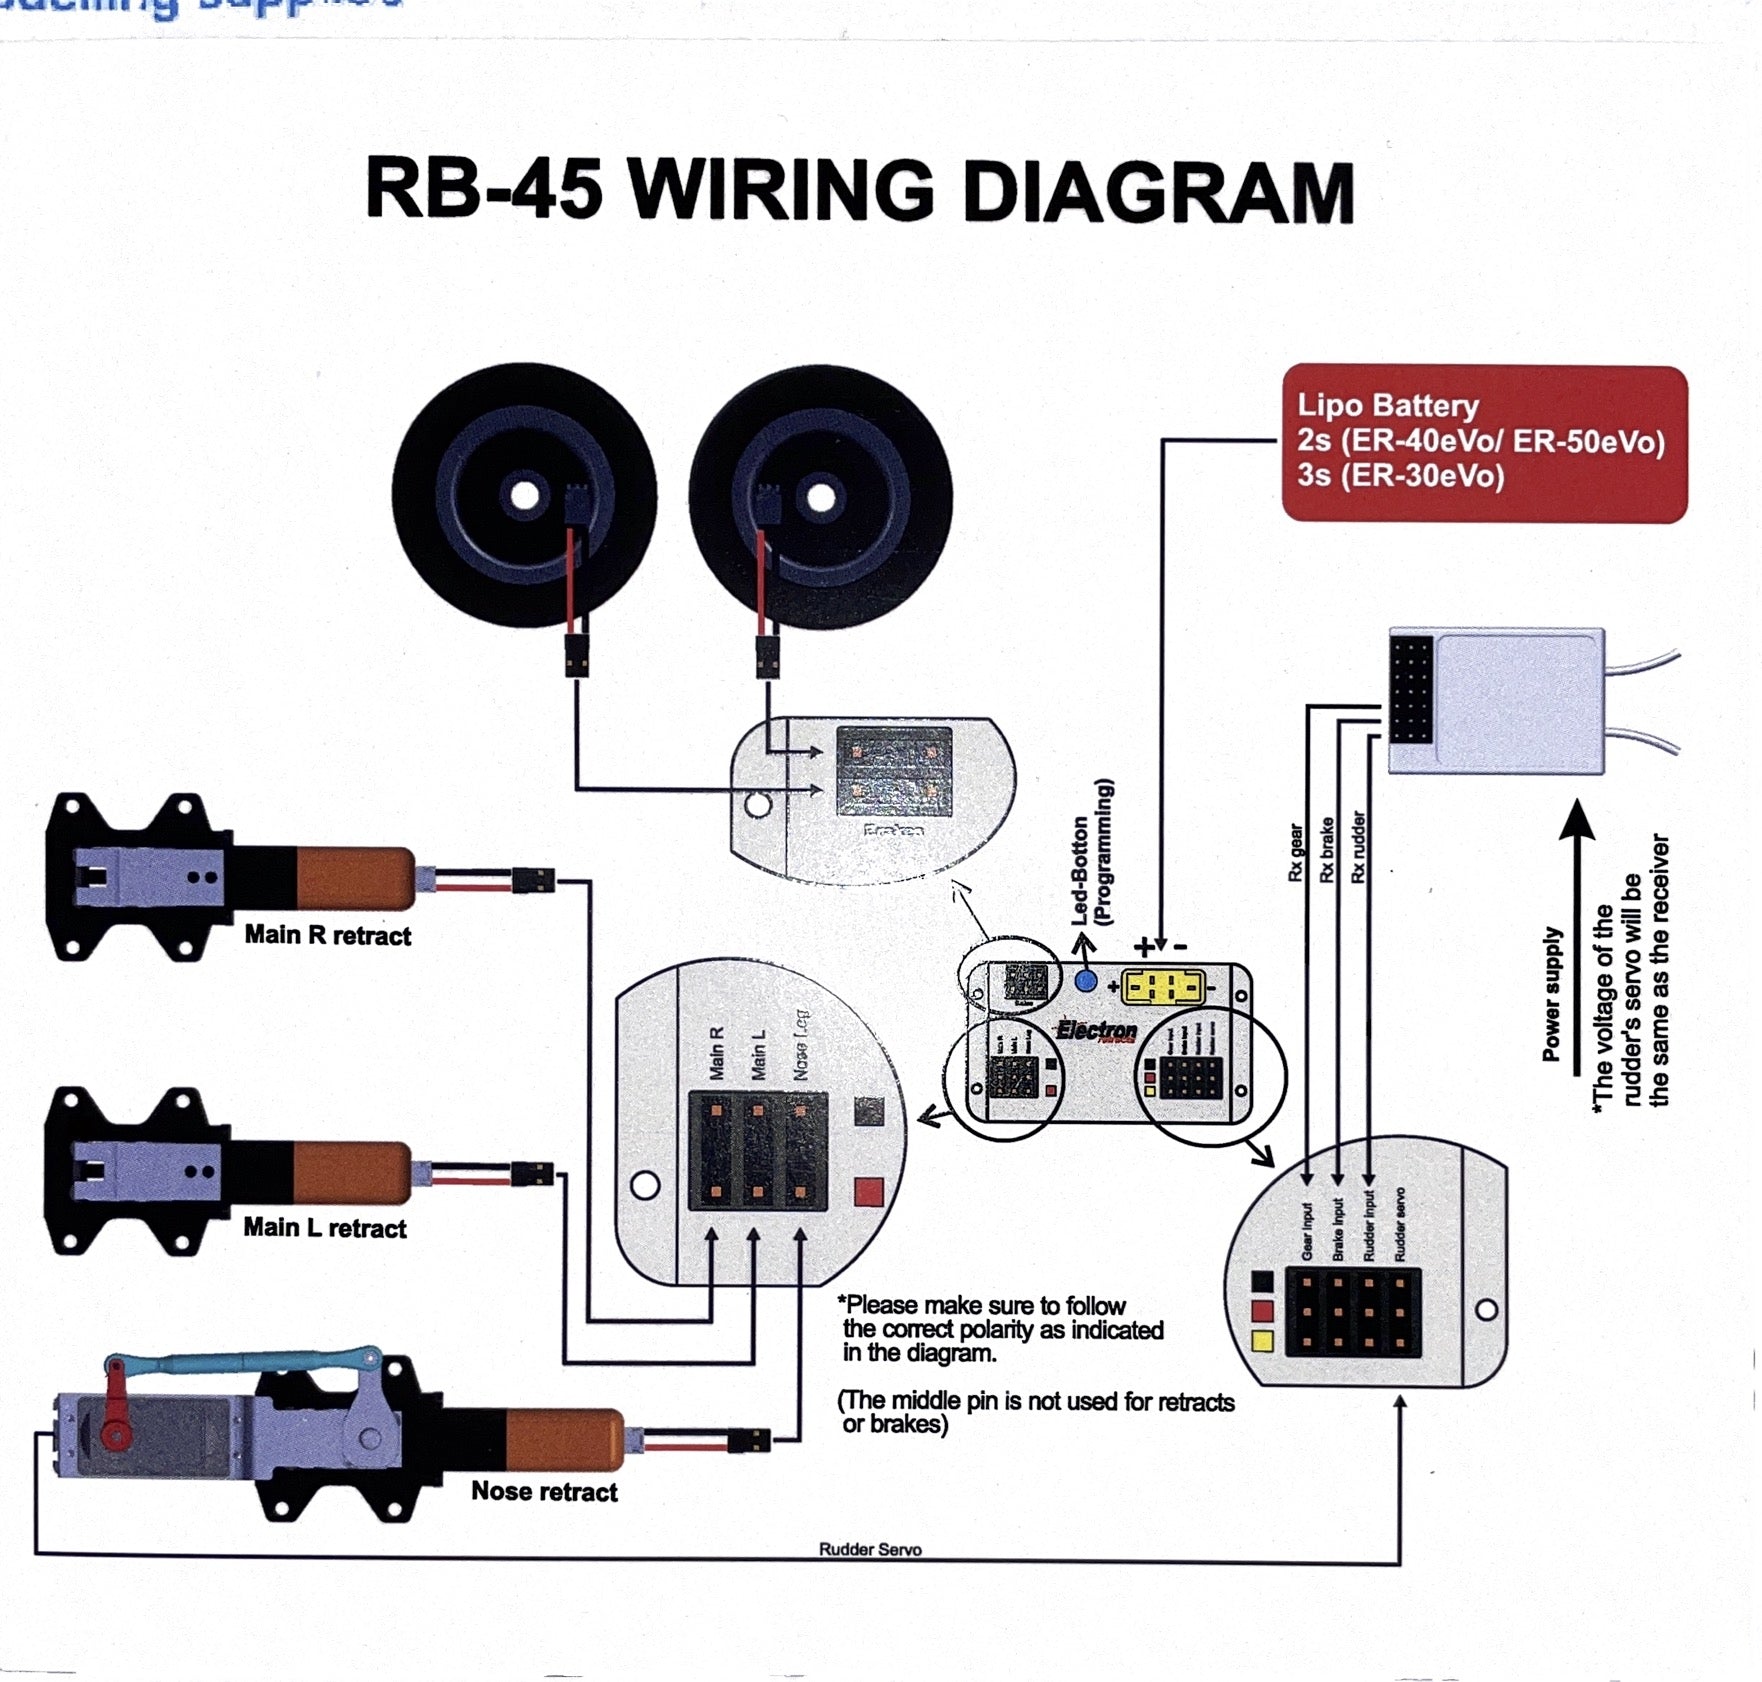 RB-45 Landing Gear Controller for ER50 from Electron Retracts RB45